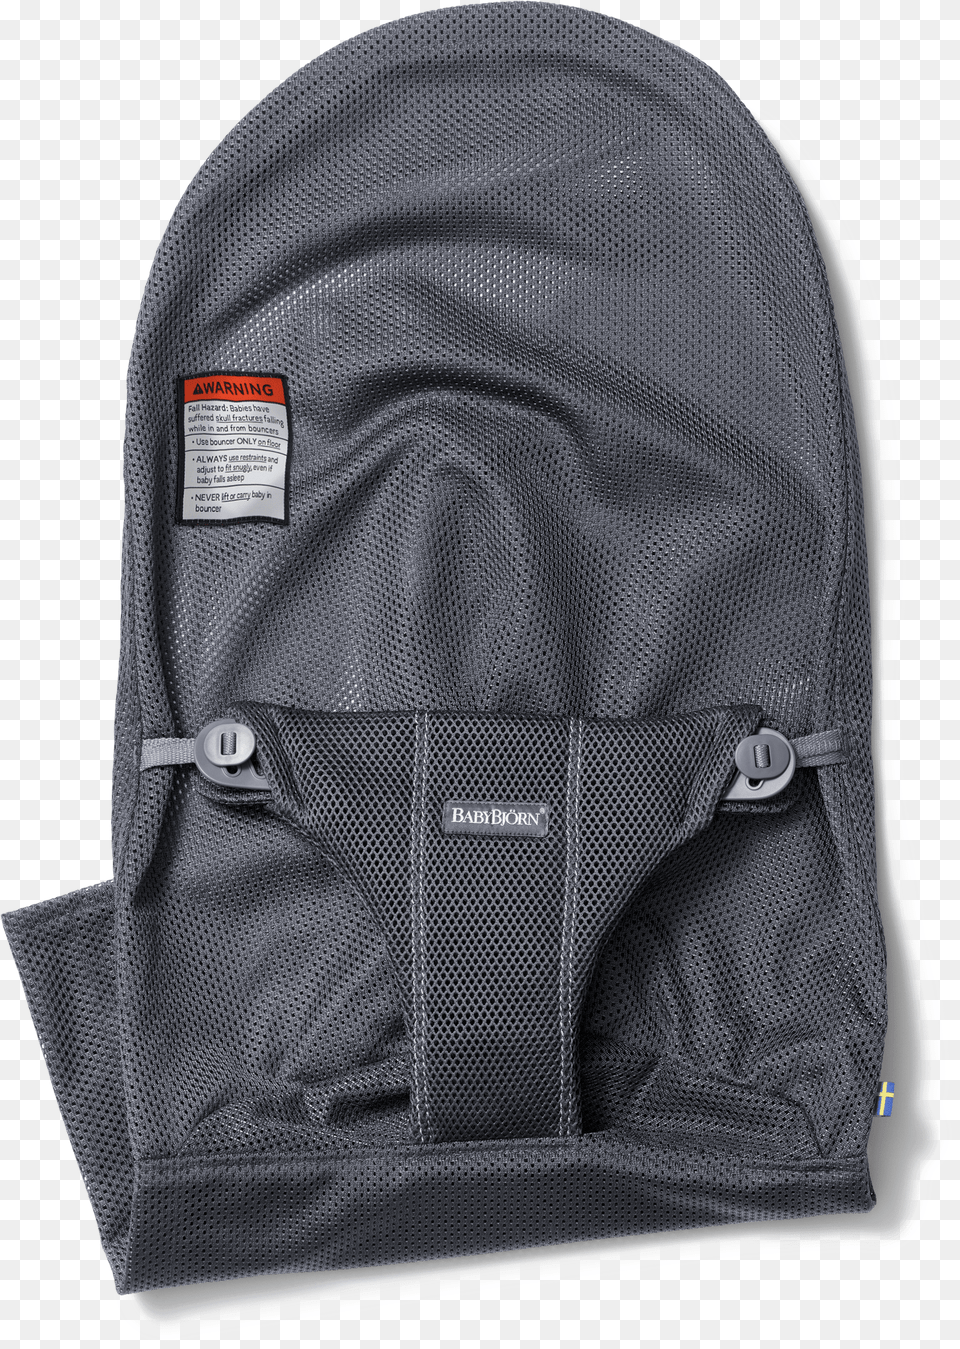 Extra Baby Bjorn Bouncer Mesh, Backpack, Bag Free Png